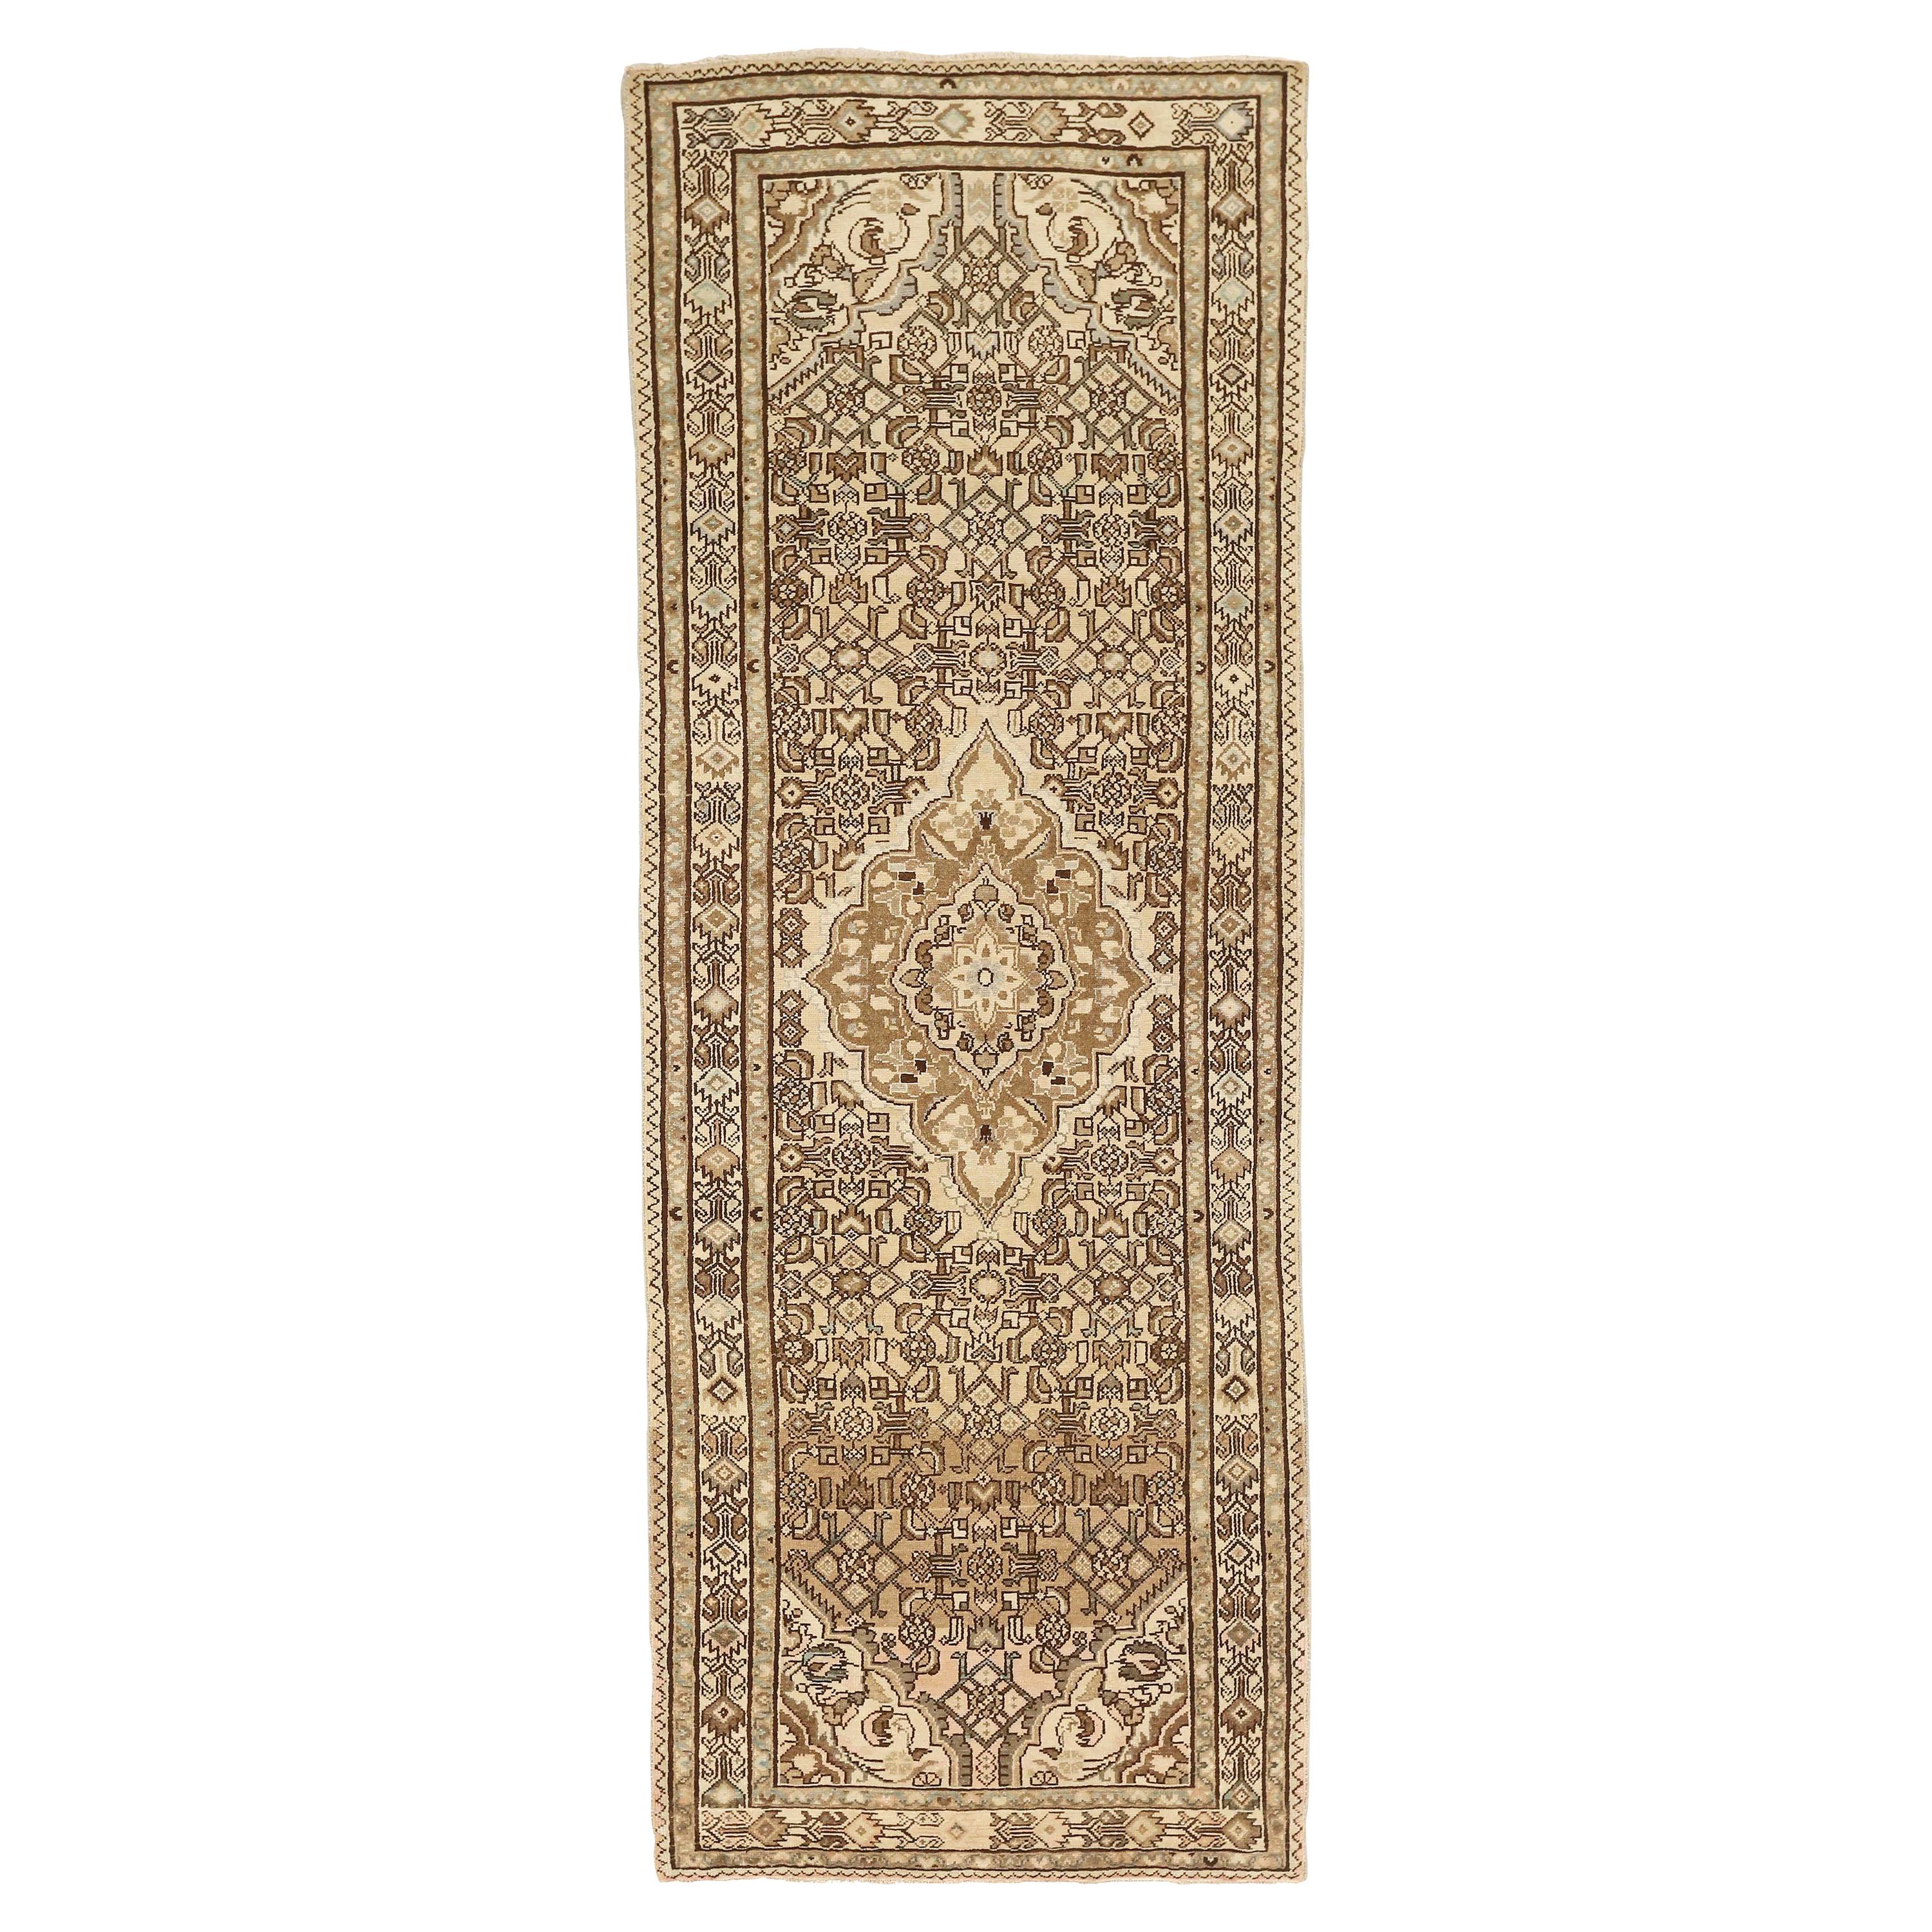 20th Century Antique Persian Malayer Runner Rug with Gray & Brown Floral Motifs For Sale